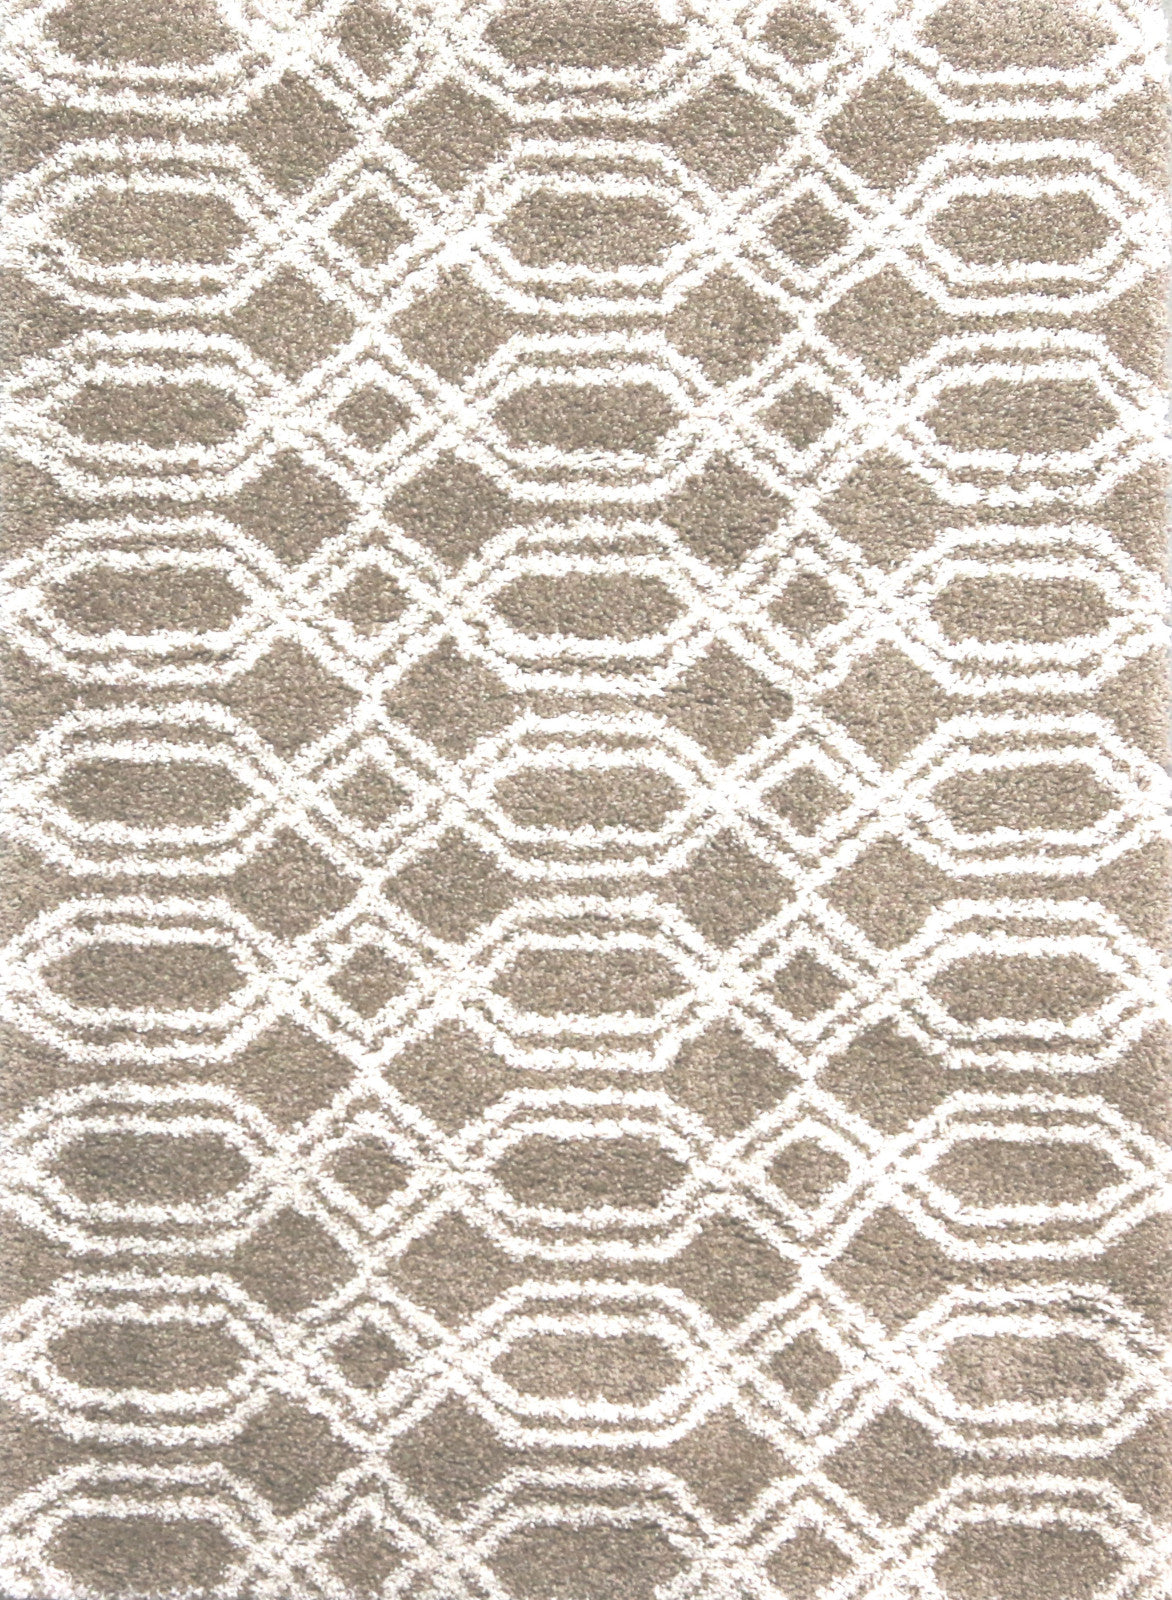 Dynamic Rugs Passion 6202 Beige Area Rug main image